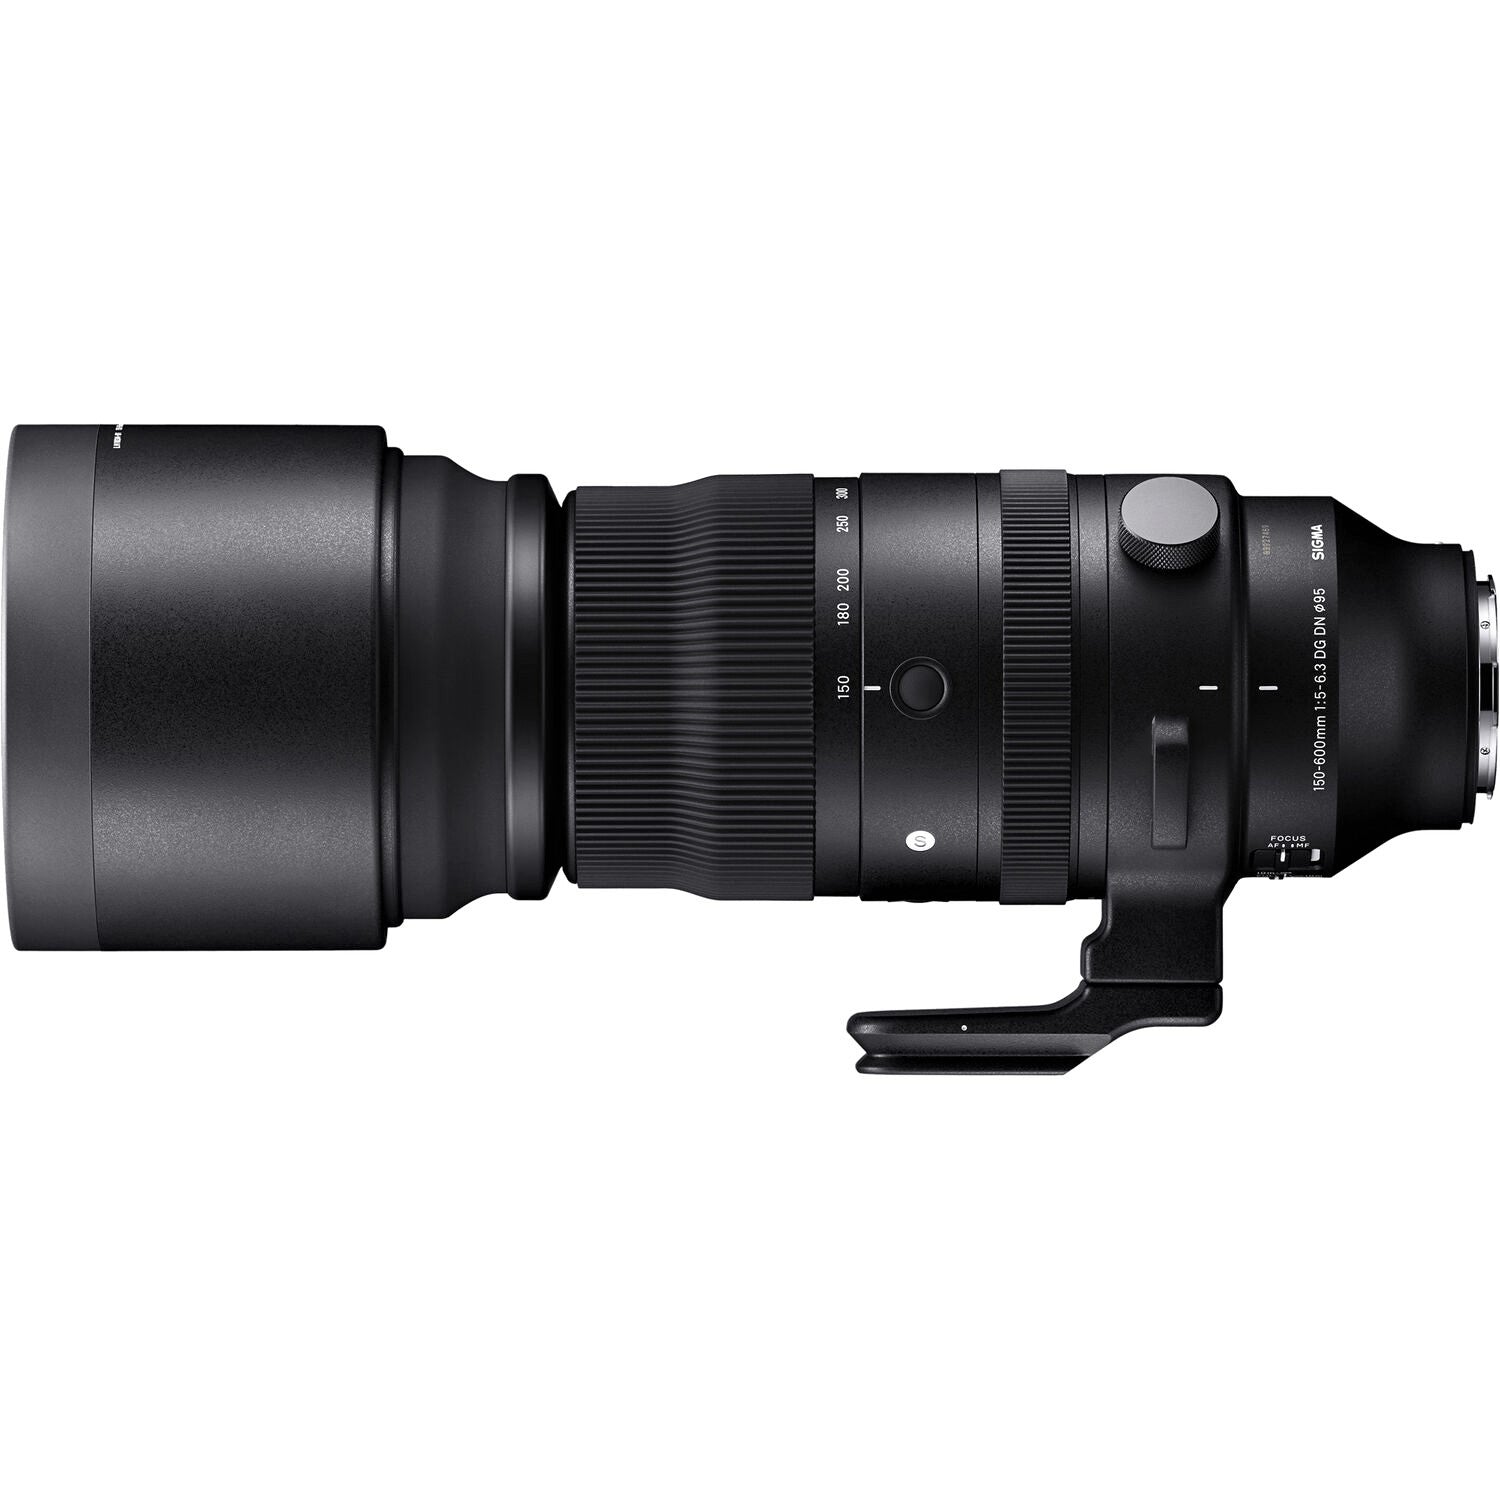 Sigma 150-600mm F5-6.3 DG DN OS Sports Lens (Sony E Mount) with Attached Tripod Socket